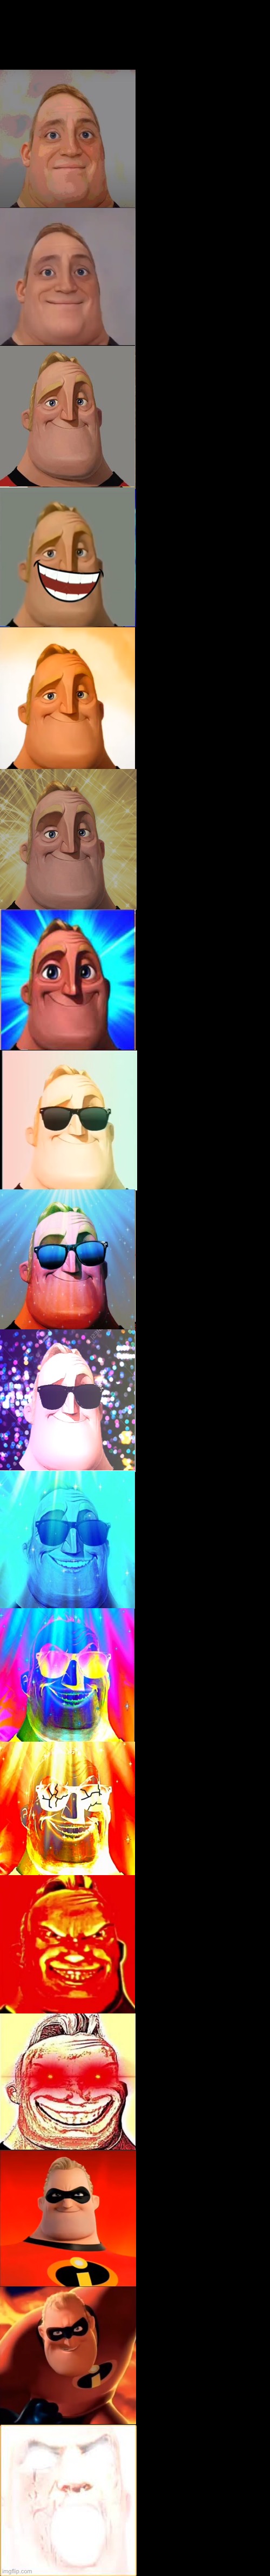 High Quality Mr incredible becoming canny extended Blank Meme Template